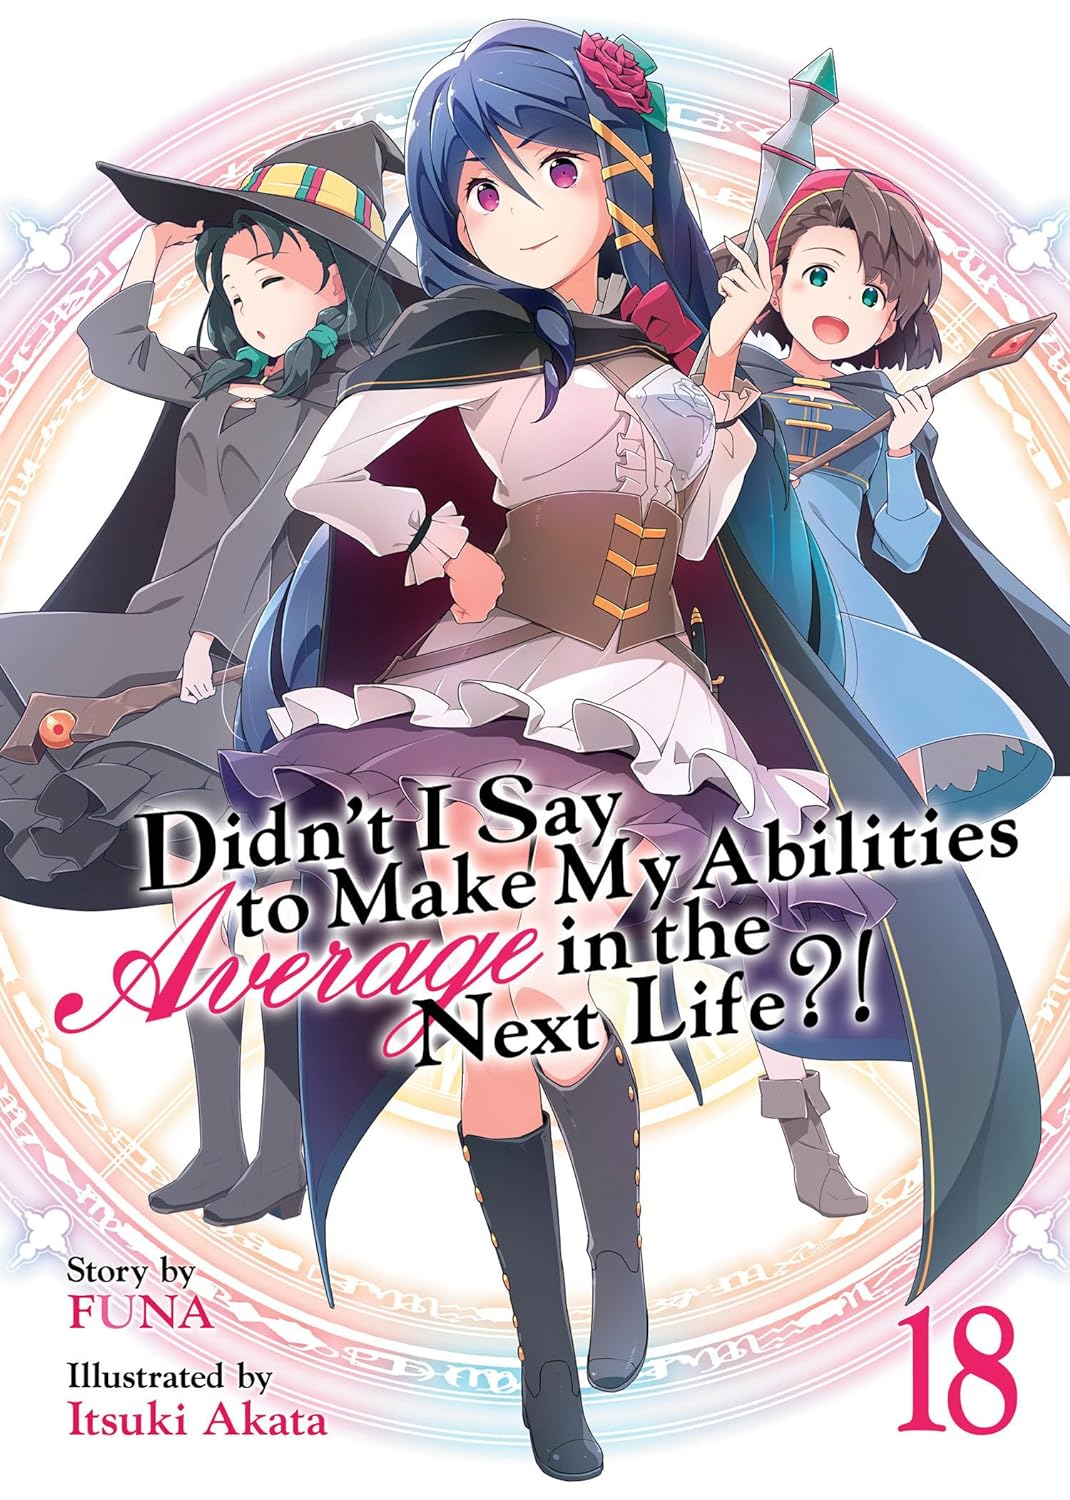 (28/05/2024) Didn't I Say to Make My Abilities Average in the Next Life?! (Light Novel) Vol. 18